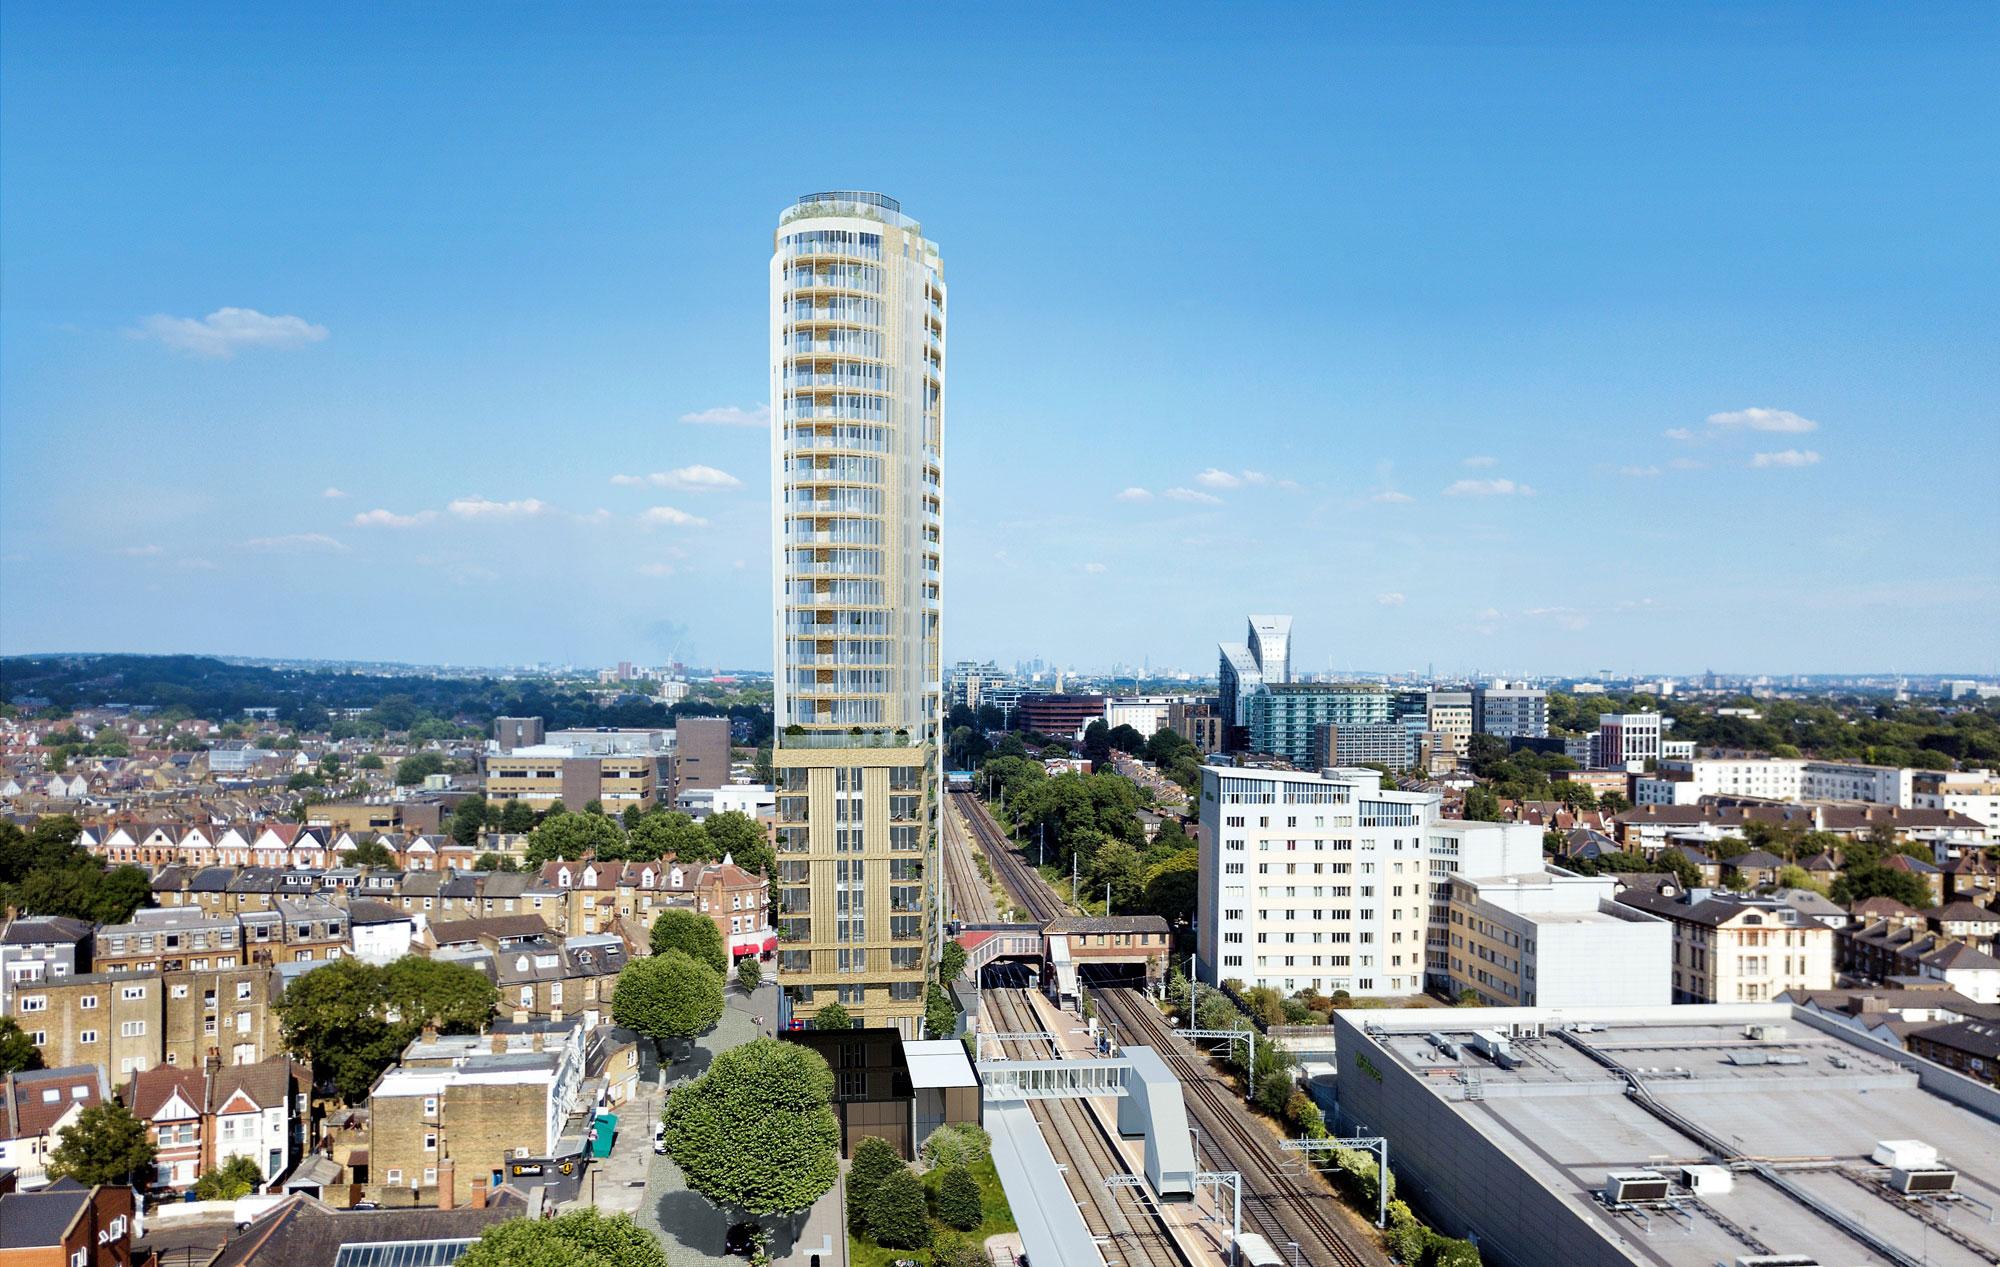 England: Affordable housing tower plan to be Ealing’s tallest building